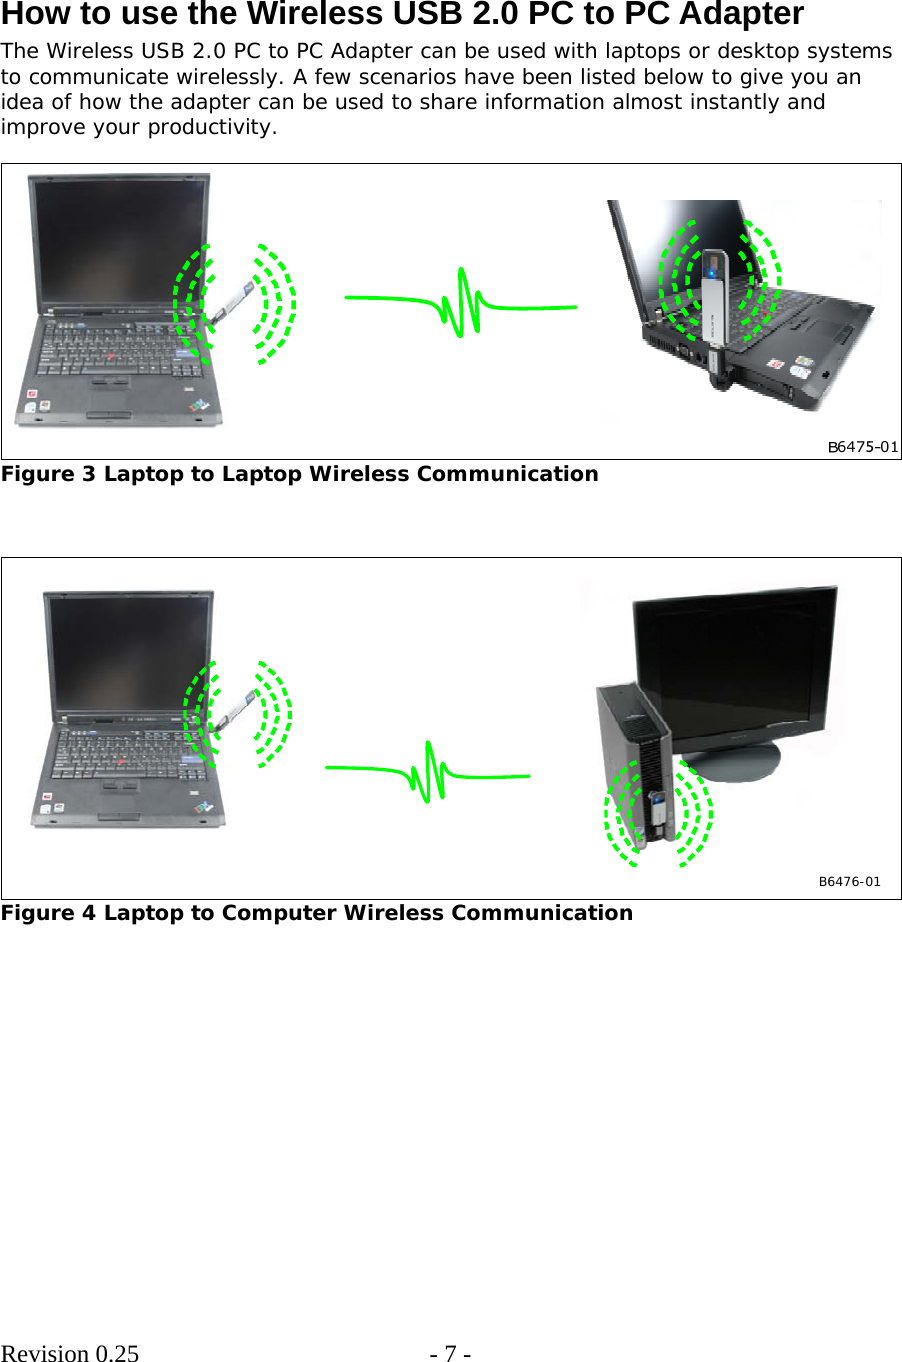        Revision 0.25  - 7 -      How to use the Wireless USB 2.0 PC to PC Adapter The Wireless USB 2.0 PC to PC Adapter can be used with laptops or desktop systems to communicate wirelessly. A few scenarios have been listed below to give you an idea of how the adapter can be used to share information almost instantly and improve your productivity.   Figure 3 Laptop to Laptop Wireless Communication    B6476-01  Figure 4 Laptop to Computer Wireless Communication  